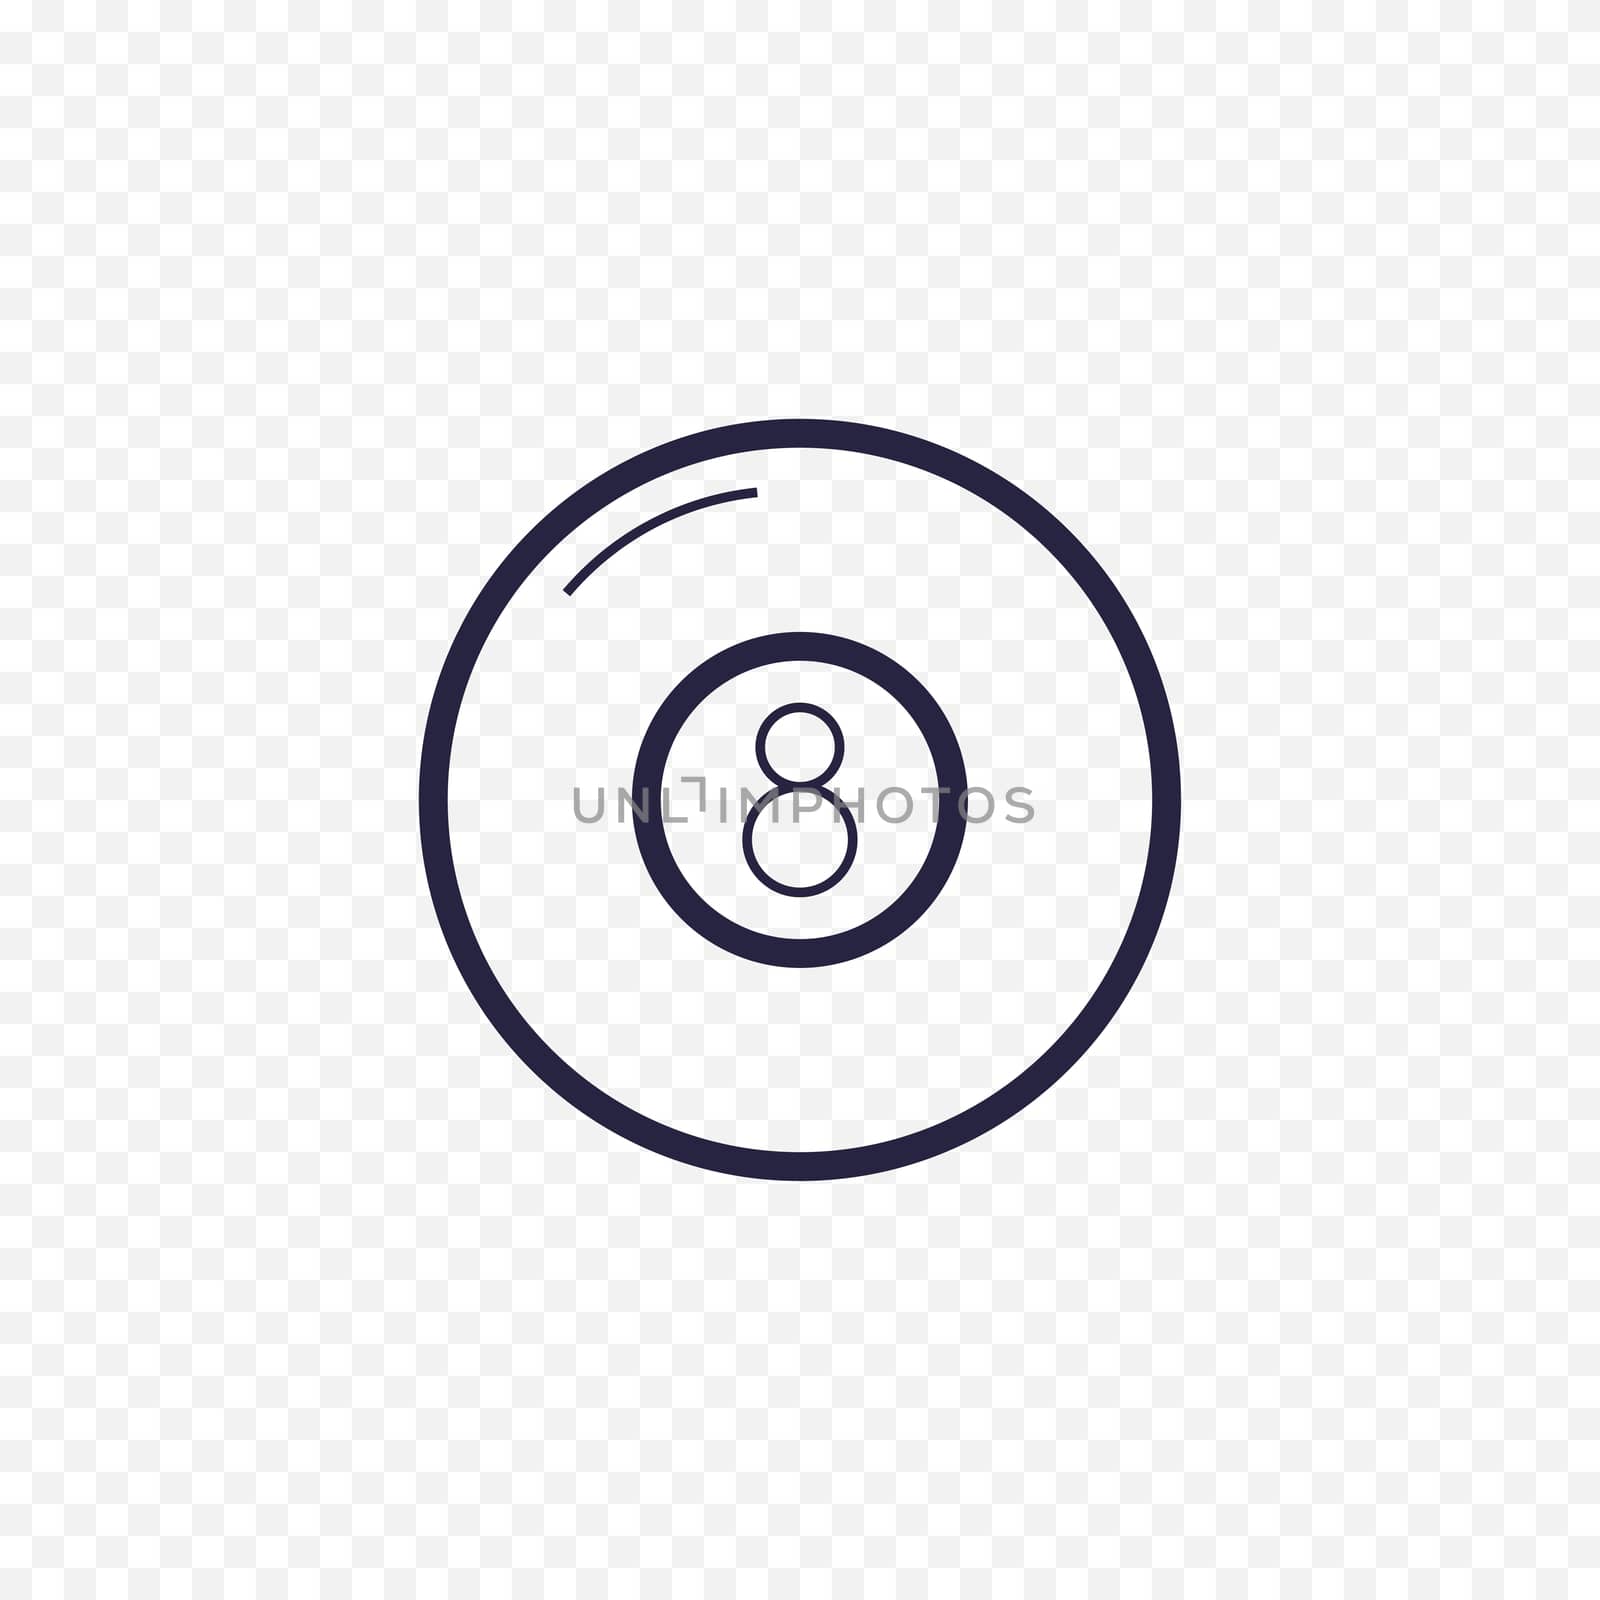 Pool eight ball line icon. Billiard game thin linear signs. Outline magic ball simple concept for websites, infographic, mobile app.